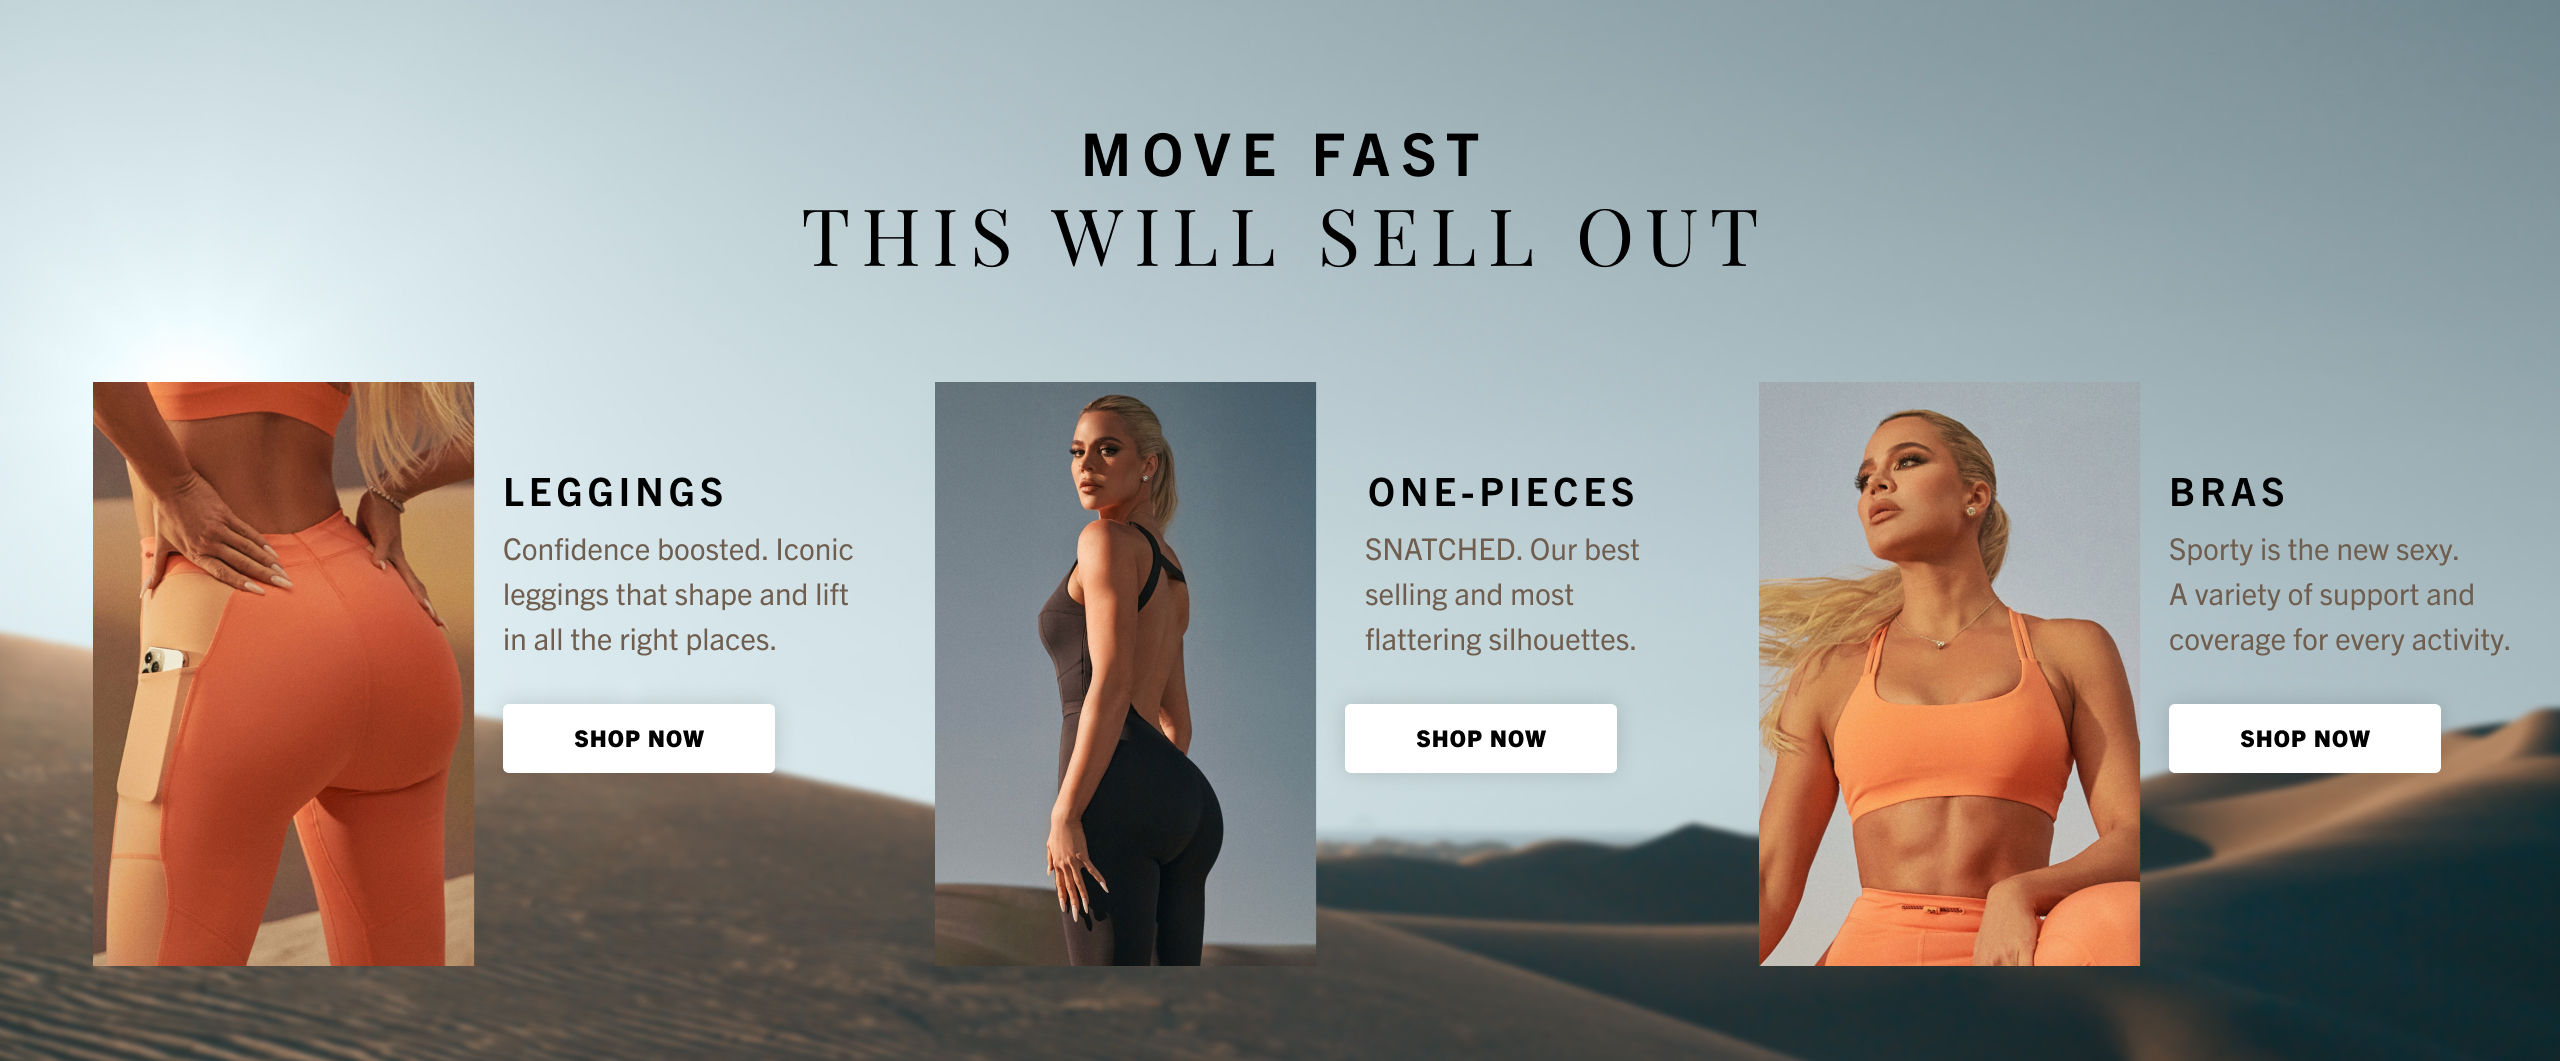 Move fast! This drop will sell out fast. Shop the edit. Including leggings, one-pieces, bras, and jackets.